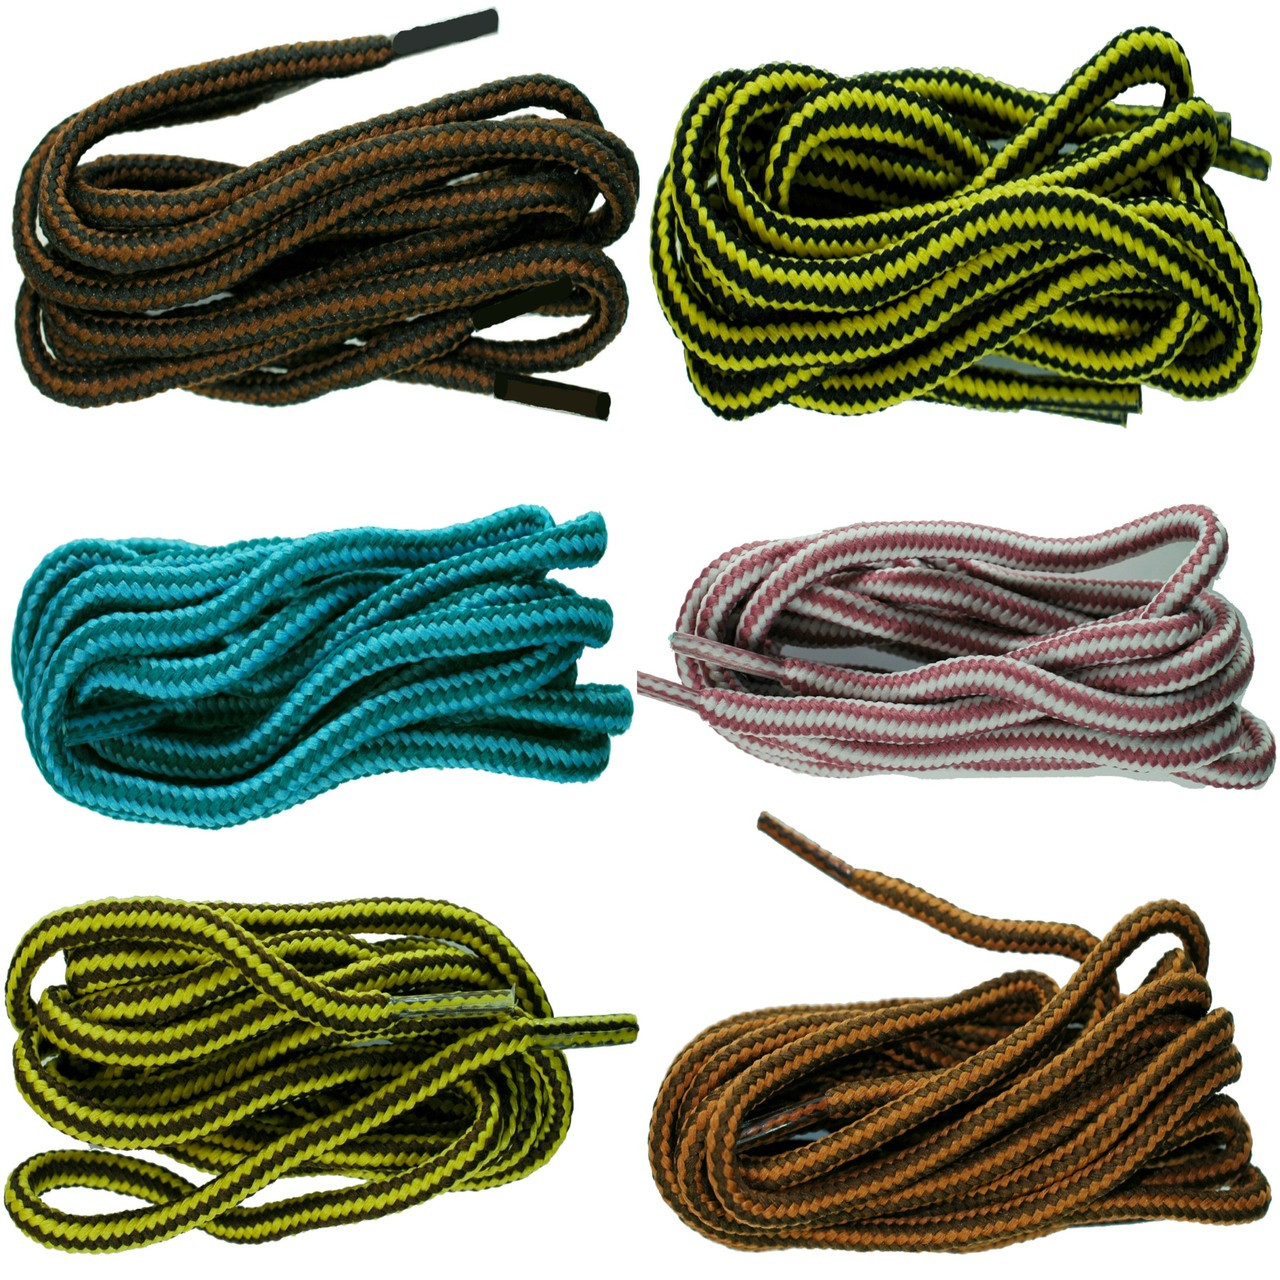 5mm Striped Laces For Boots/Shoes - TZ Trading Store